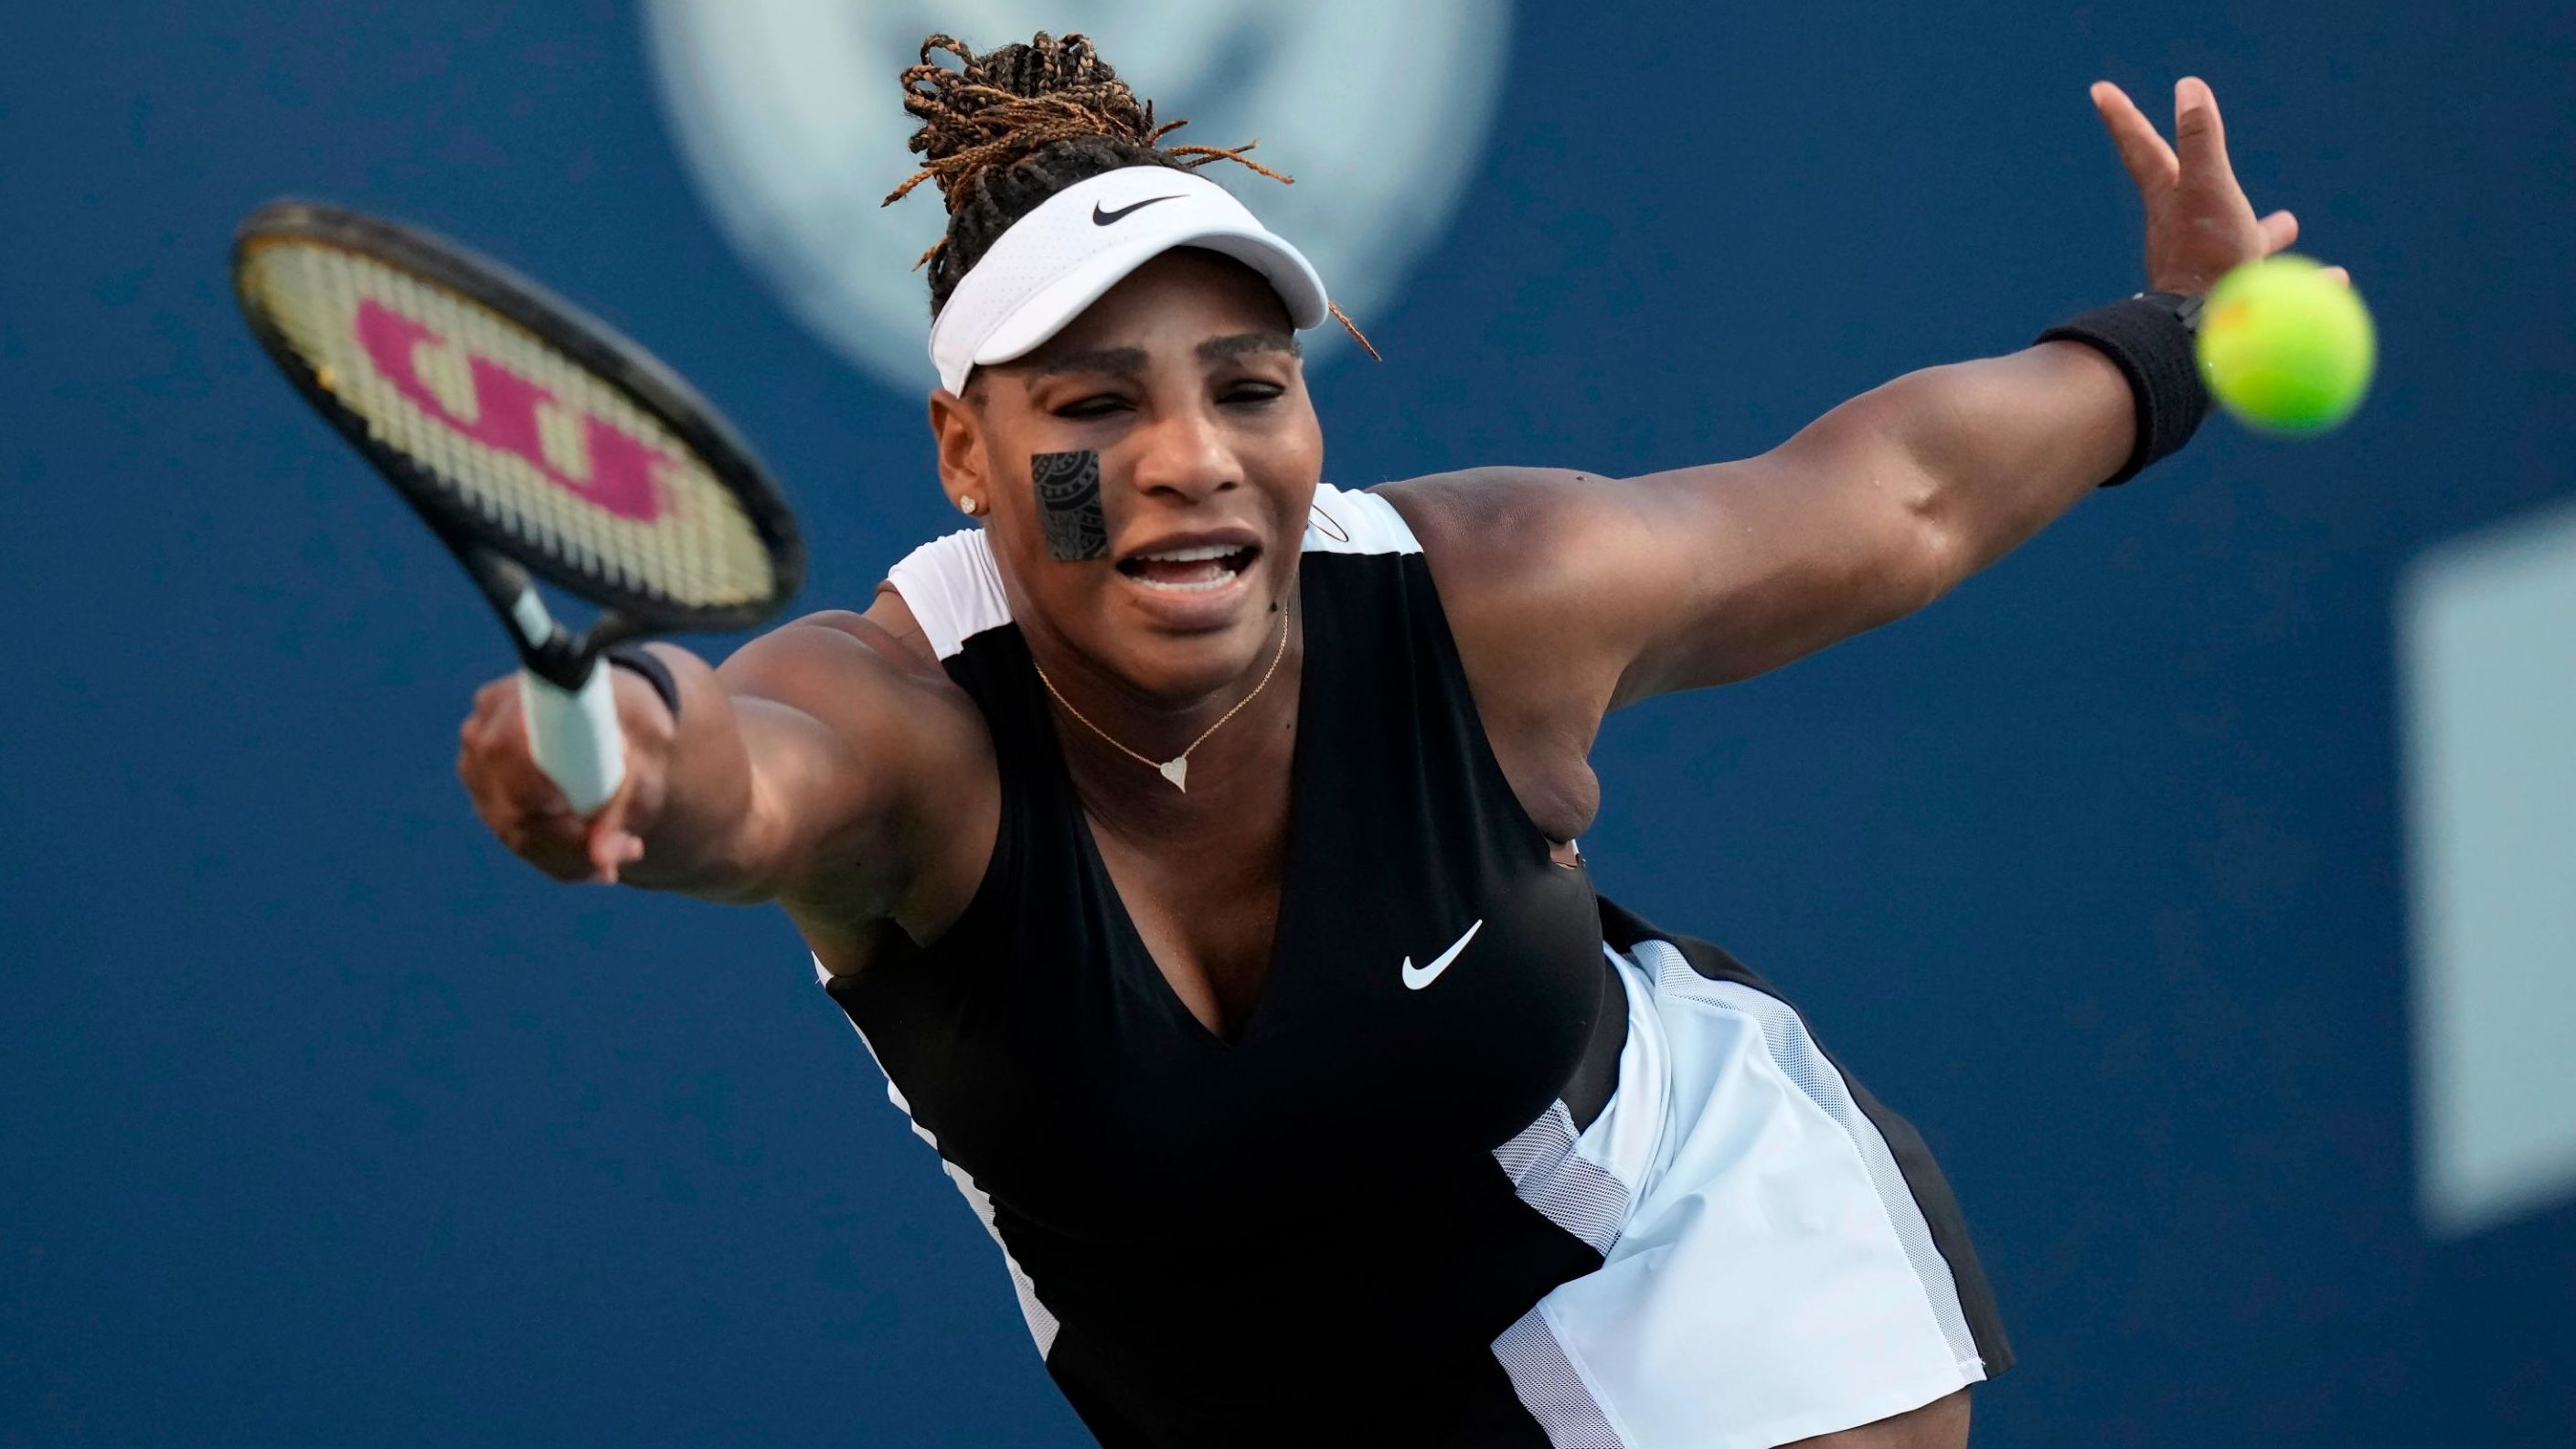 Williams won her first singles match in 430 days with victory in the first round at the Canadian Open.